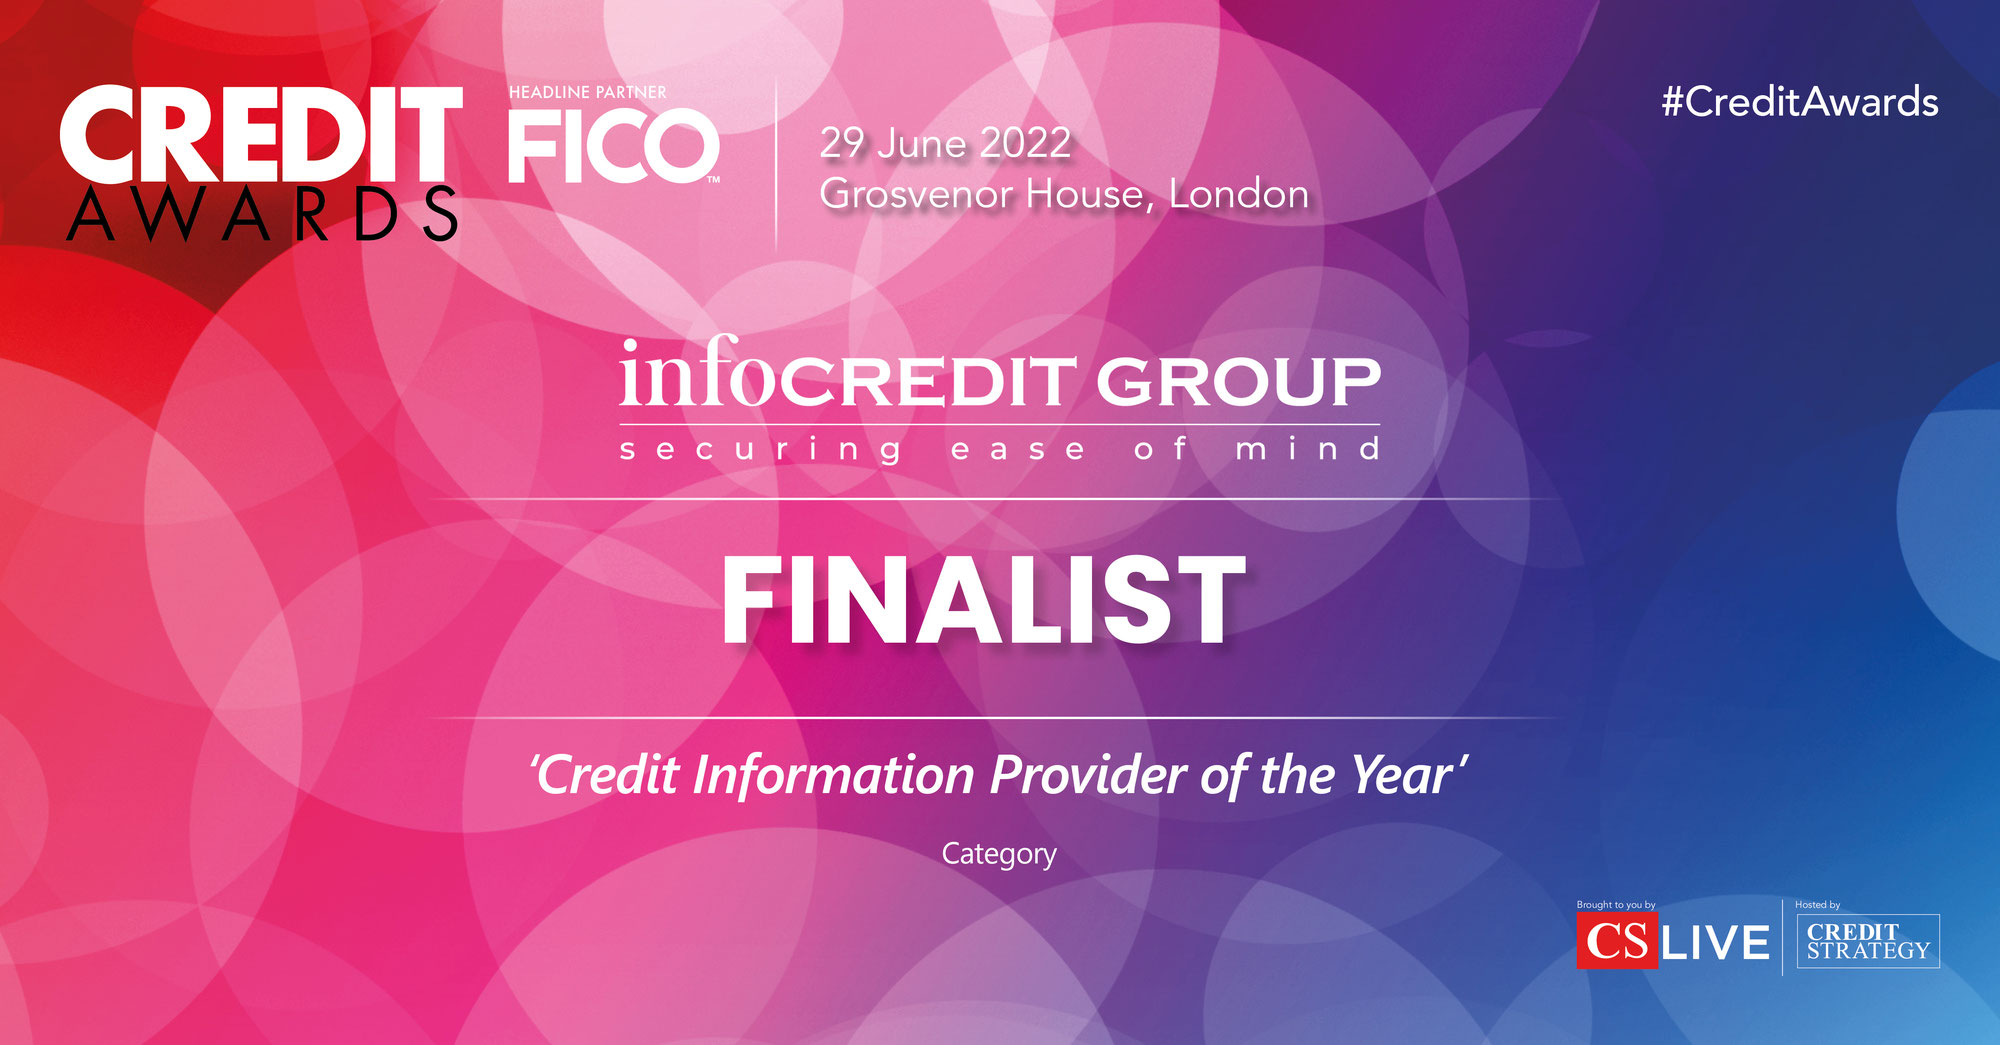 Infocredit Group shortlisted as ‘Credit Information Provider of the Year ‘at Credit Awards 2022!